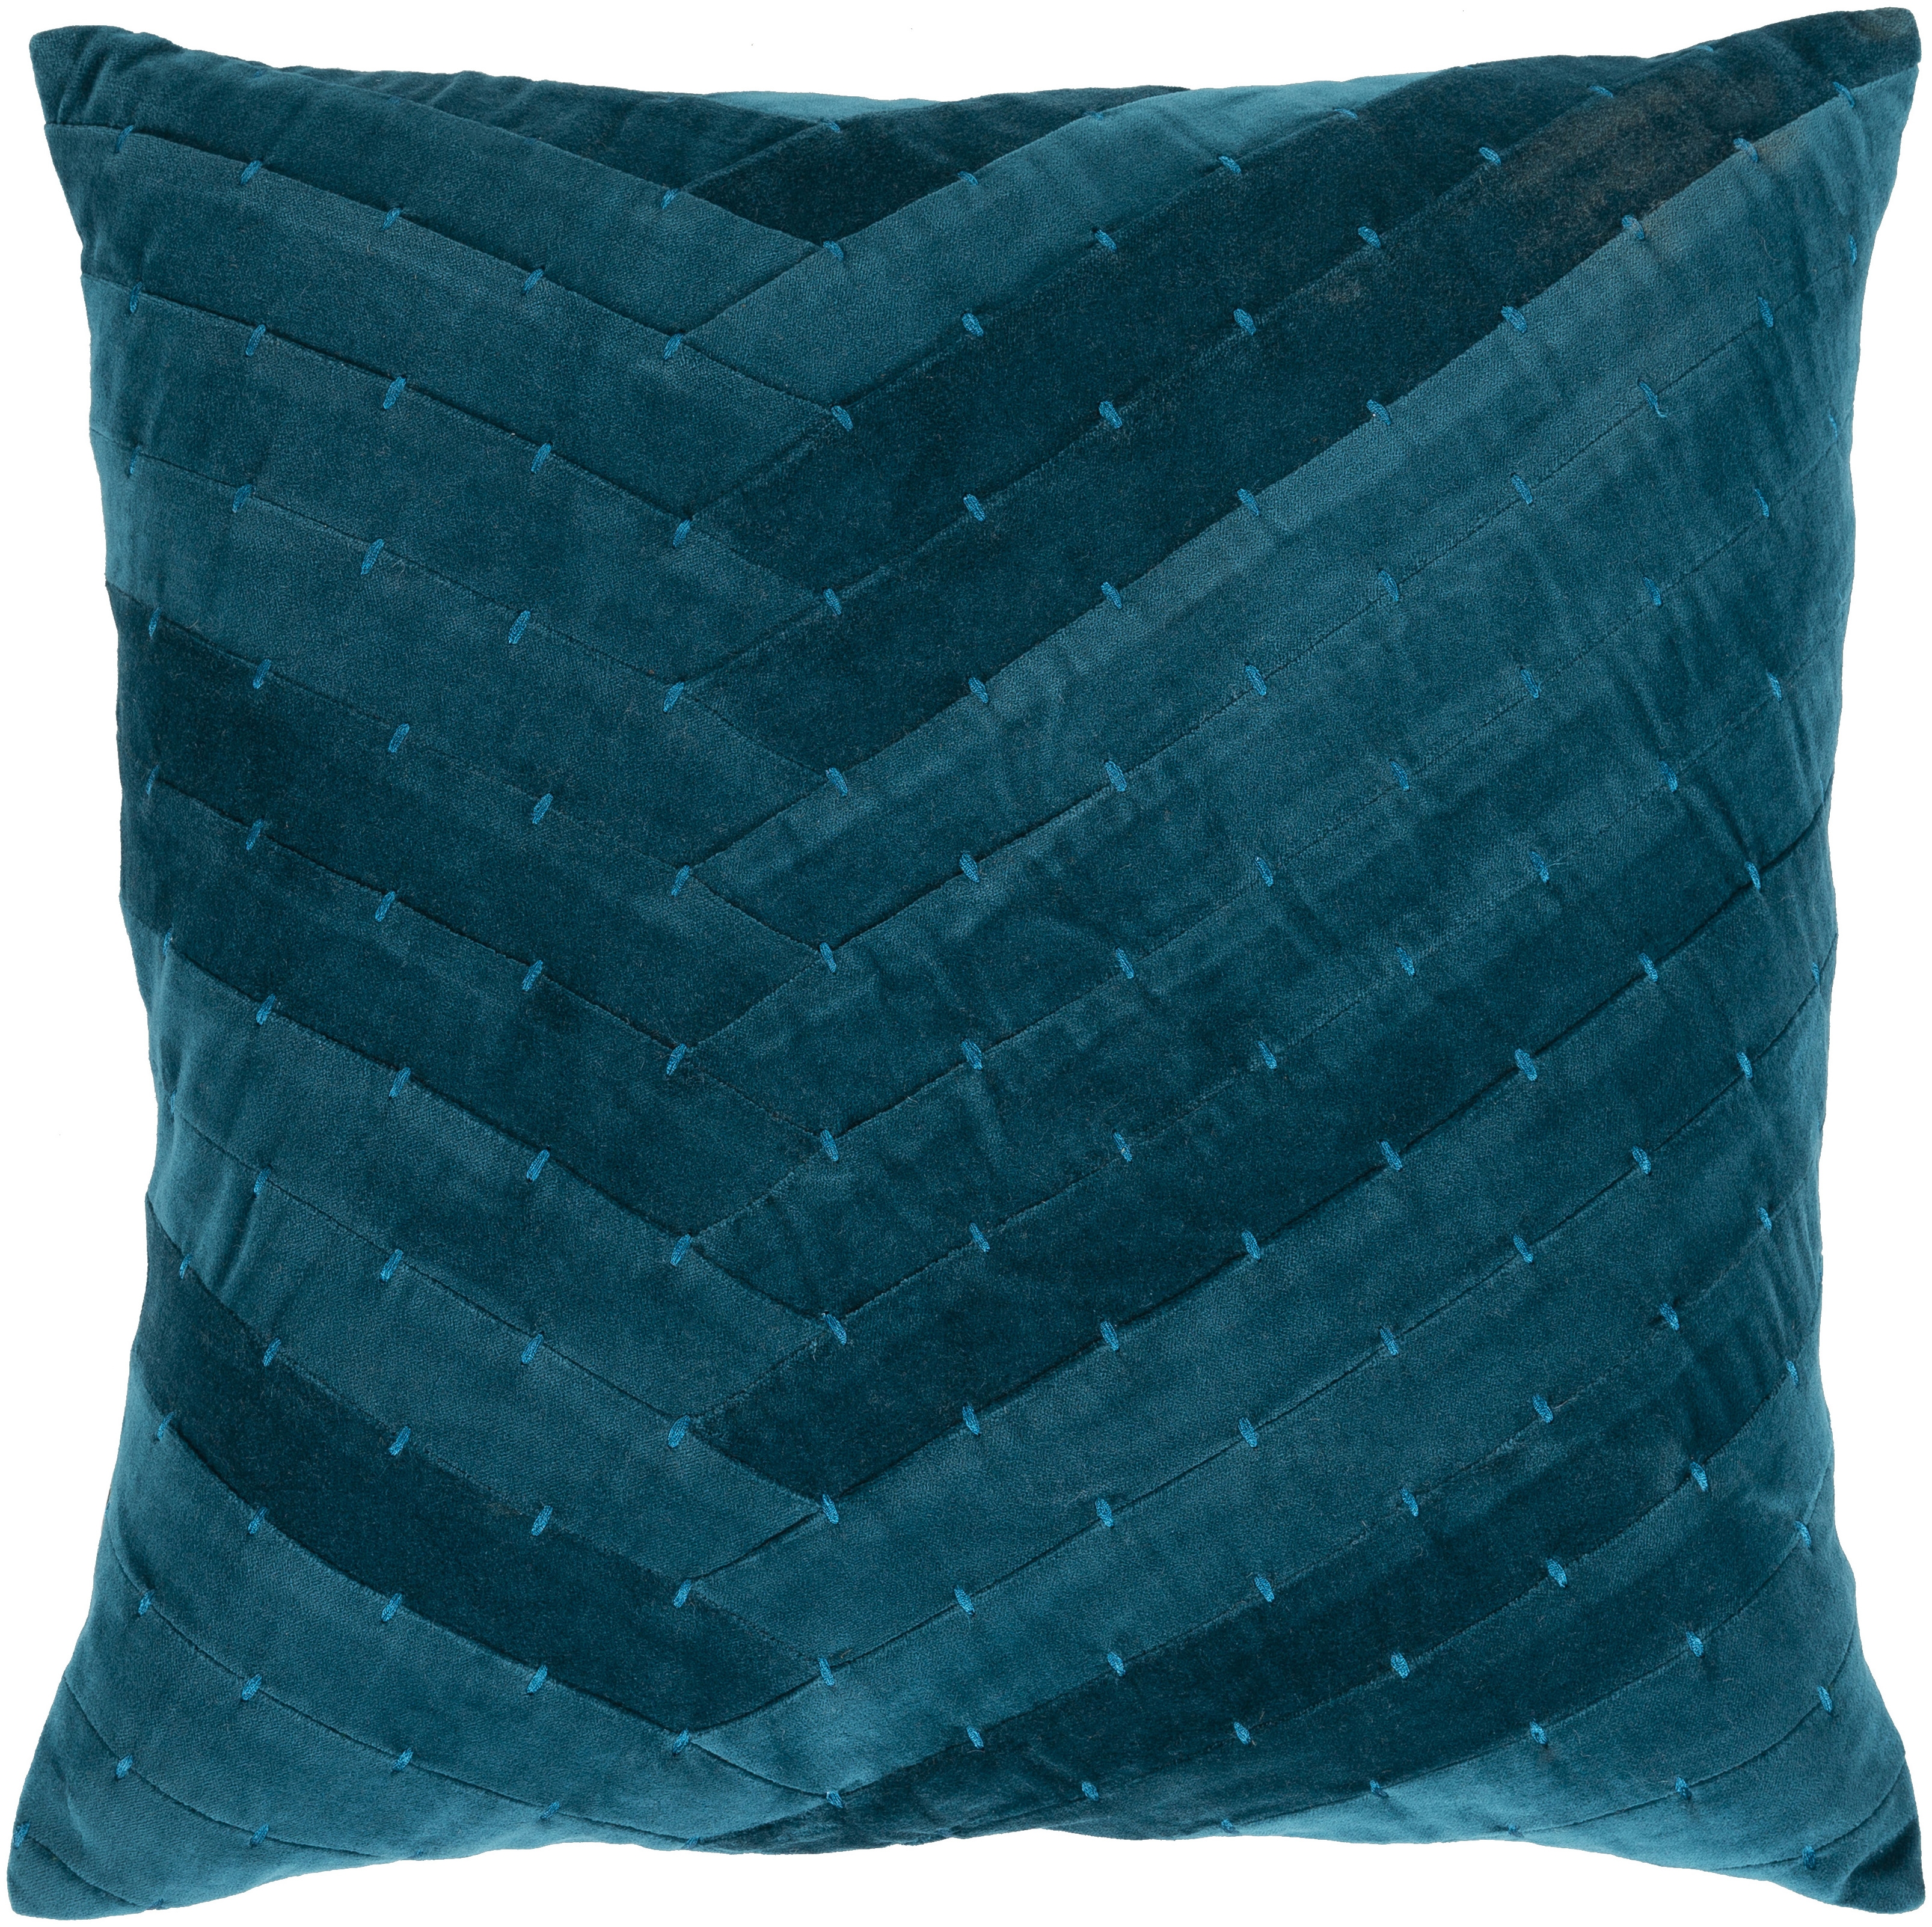 Aviana Throw Pillow, 18" x 18", with down insert - Image 0